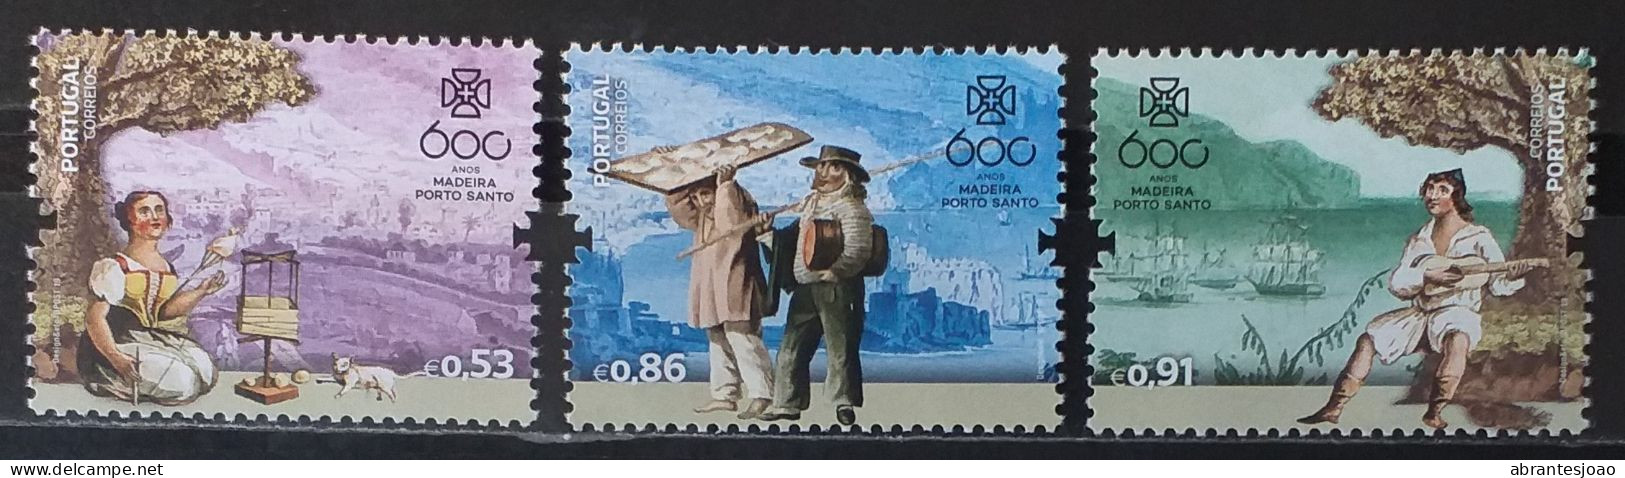 2019 - Portugal - MNH - 600 Years Since Discovery Of Madeira - 3 Stamps - Unused Stamps